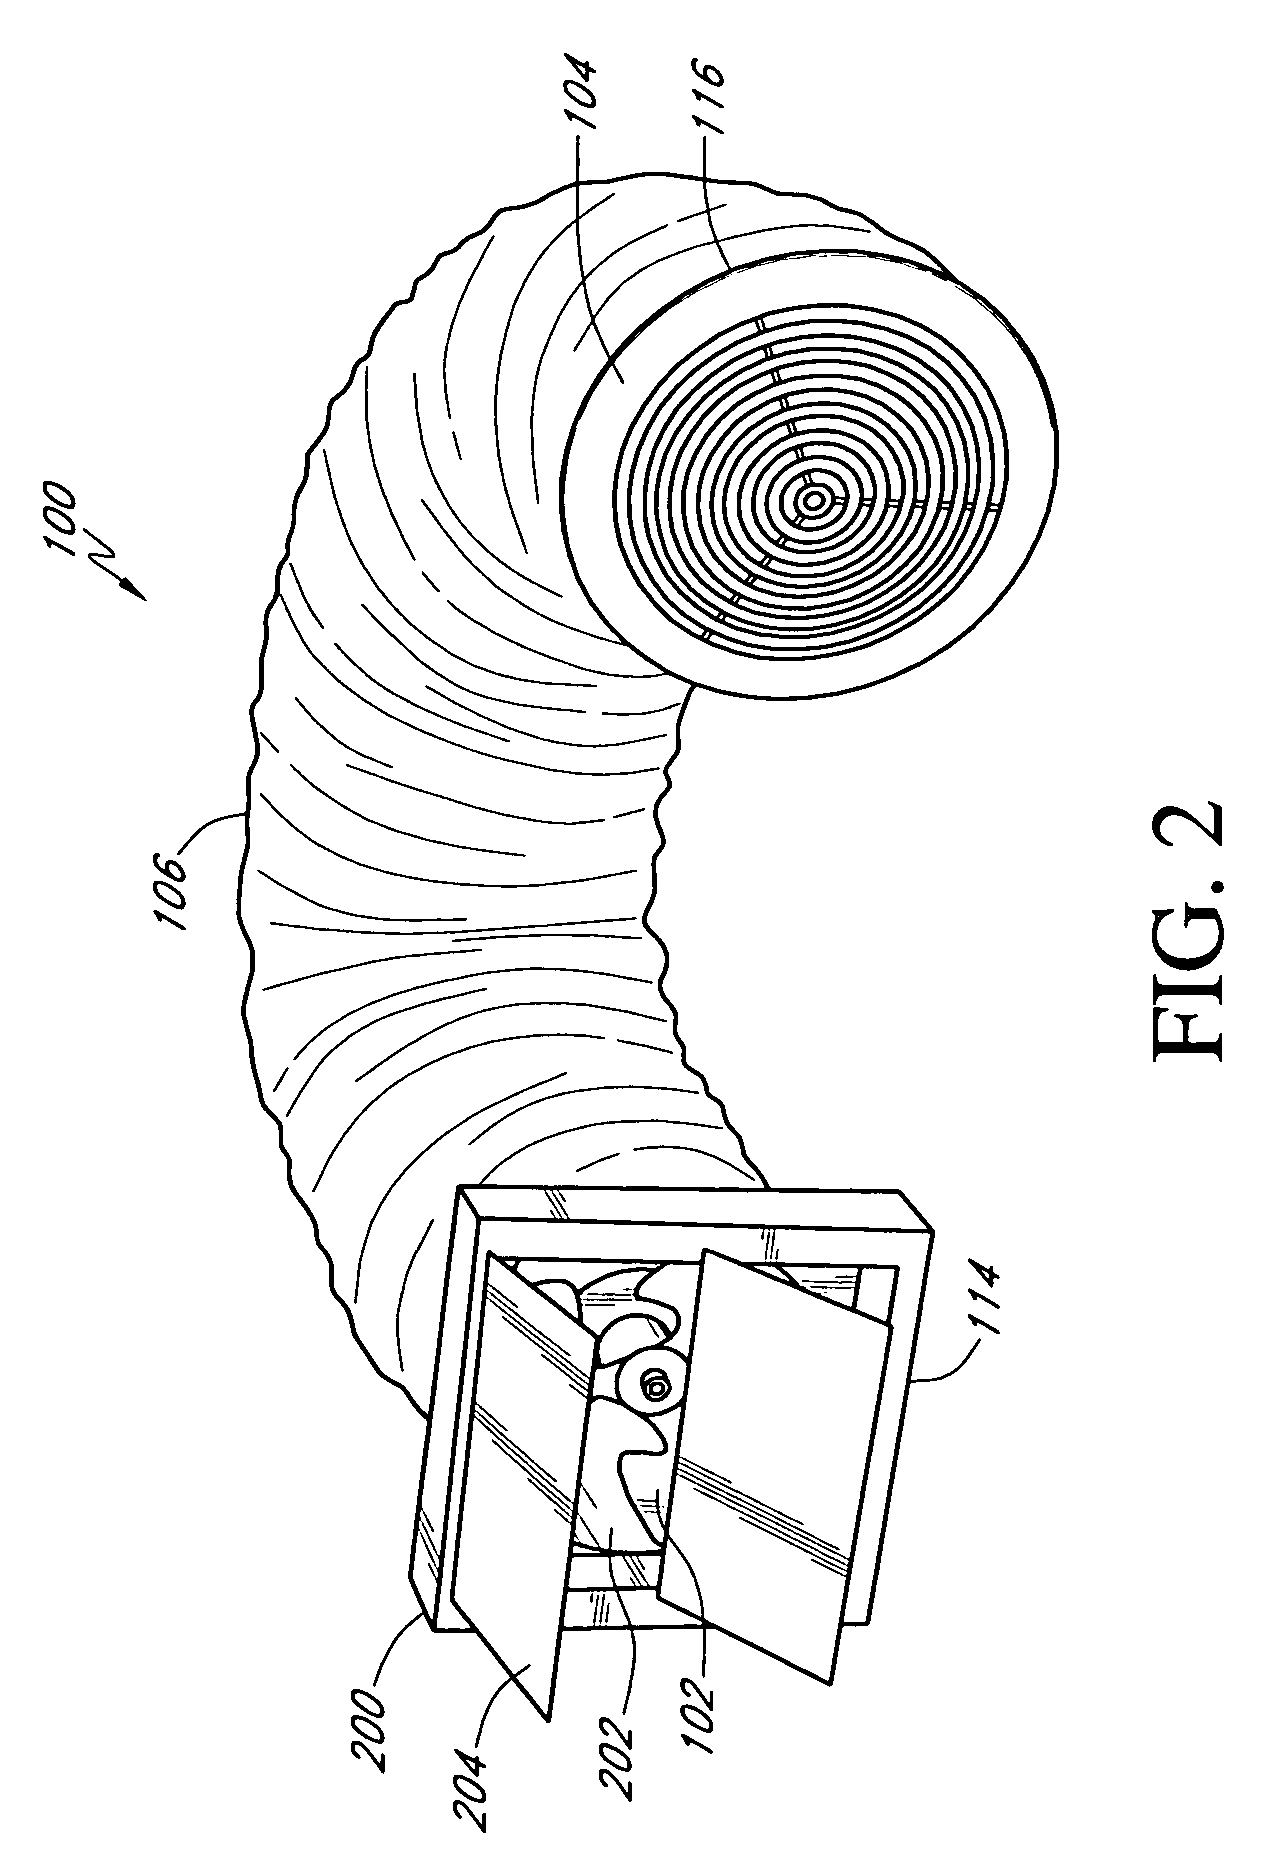 Whole house fan system and methods of installation